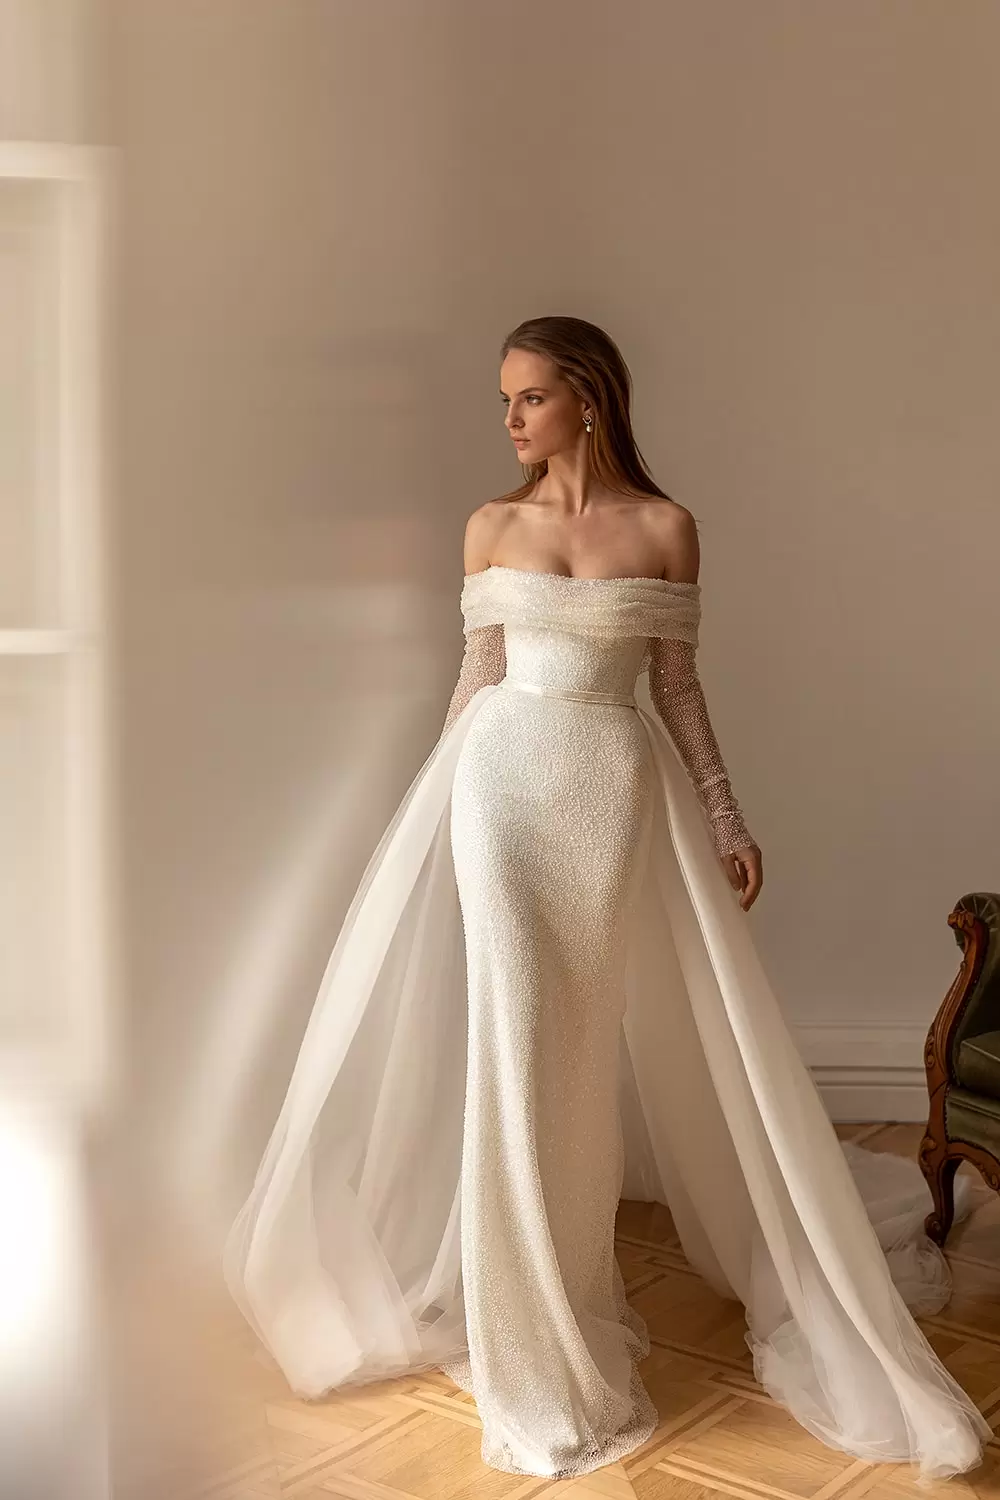 Eva Lendel, Wedding dresses, Eva Lendel is exclusively available in  Lebanon, UAE and KSA at @esposagroup 🤍 Follow the Esposa account for more  details about the la